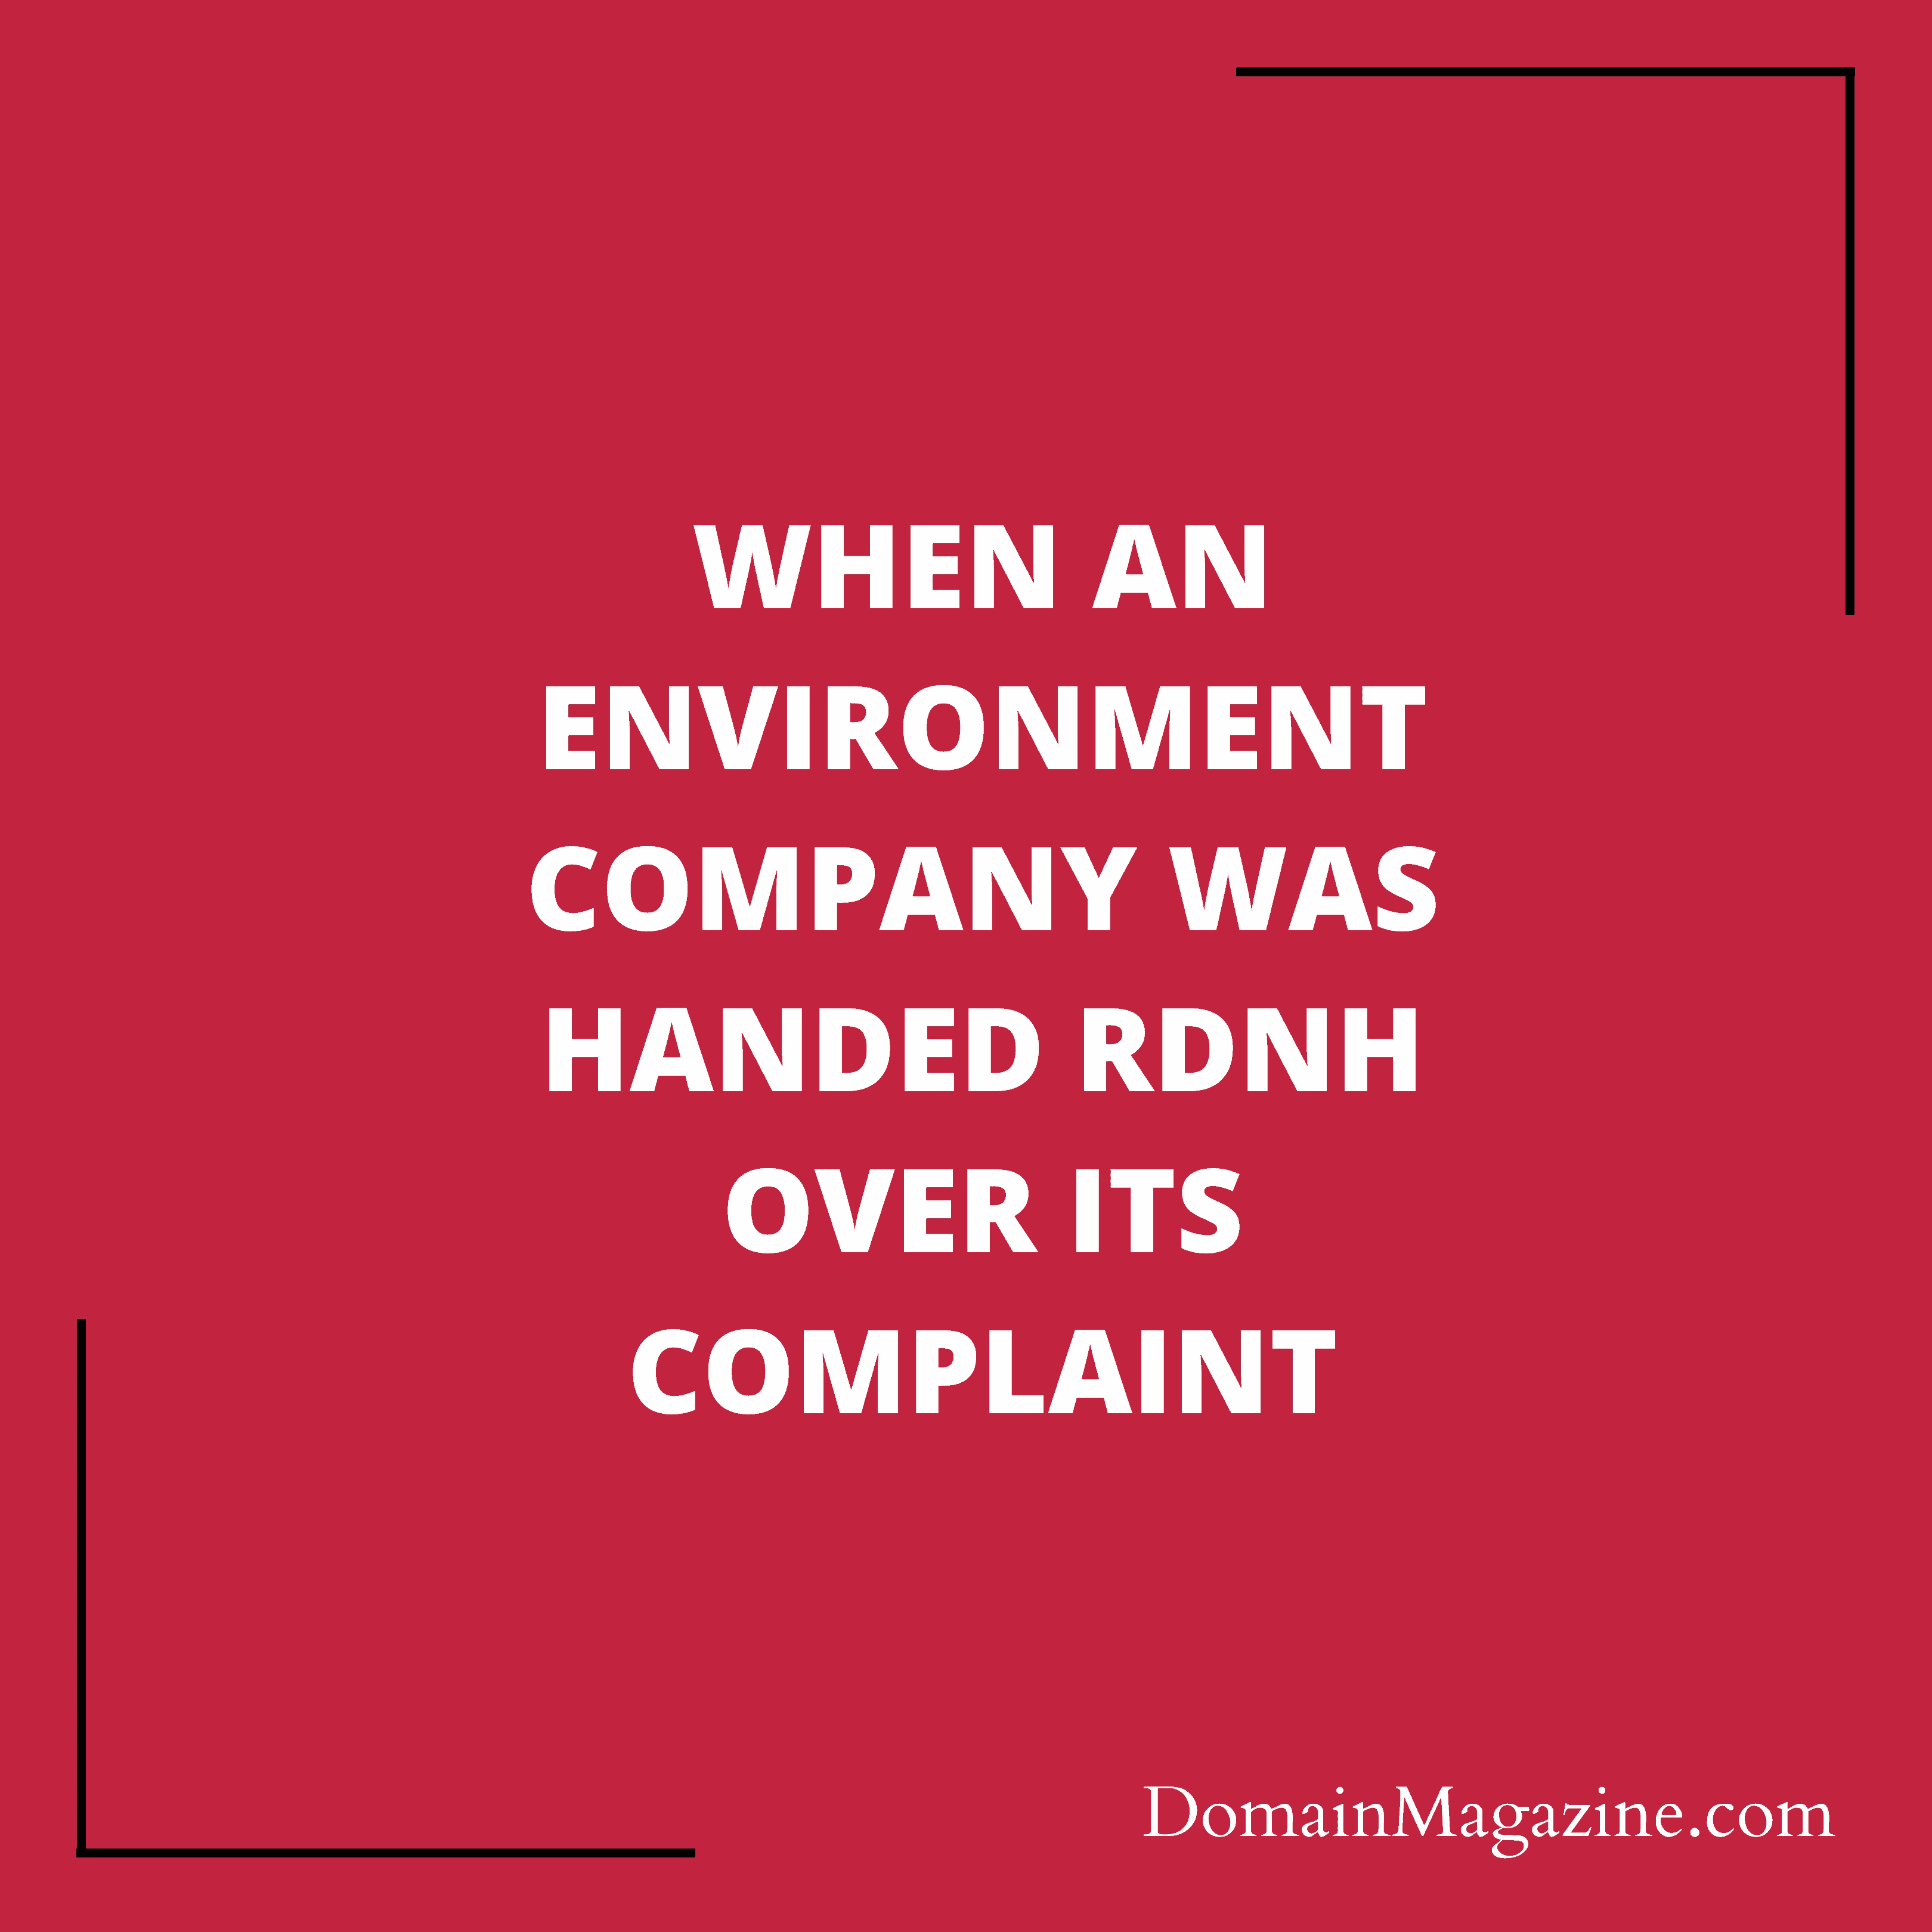 When an environment company was handed RDNH over its complaint